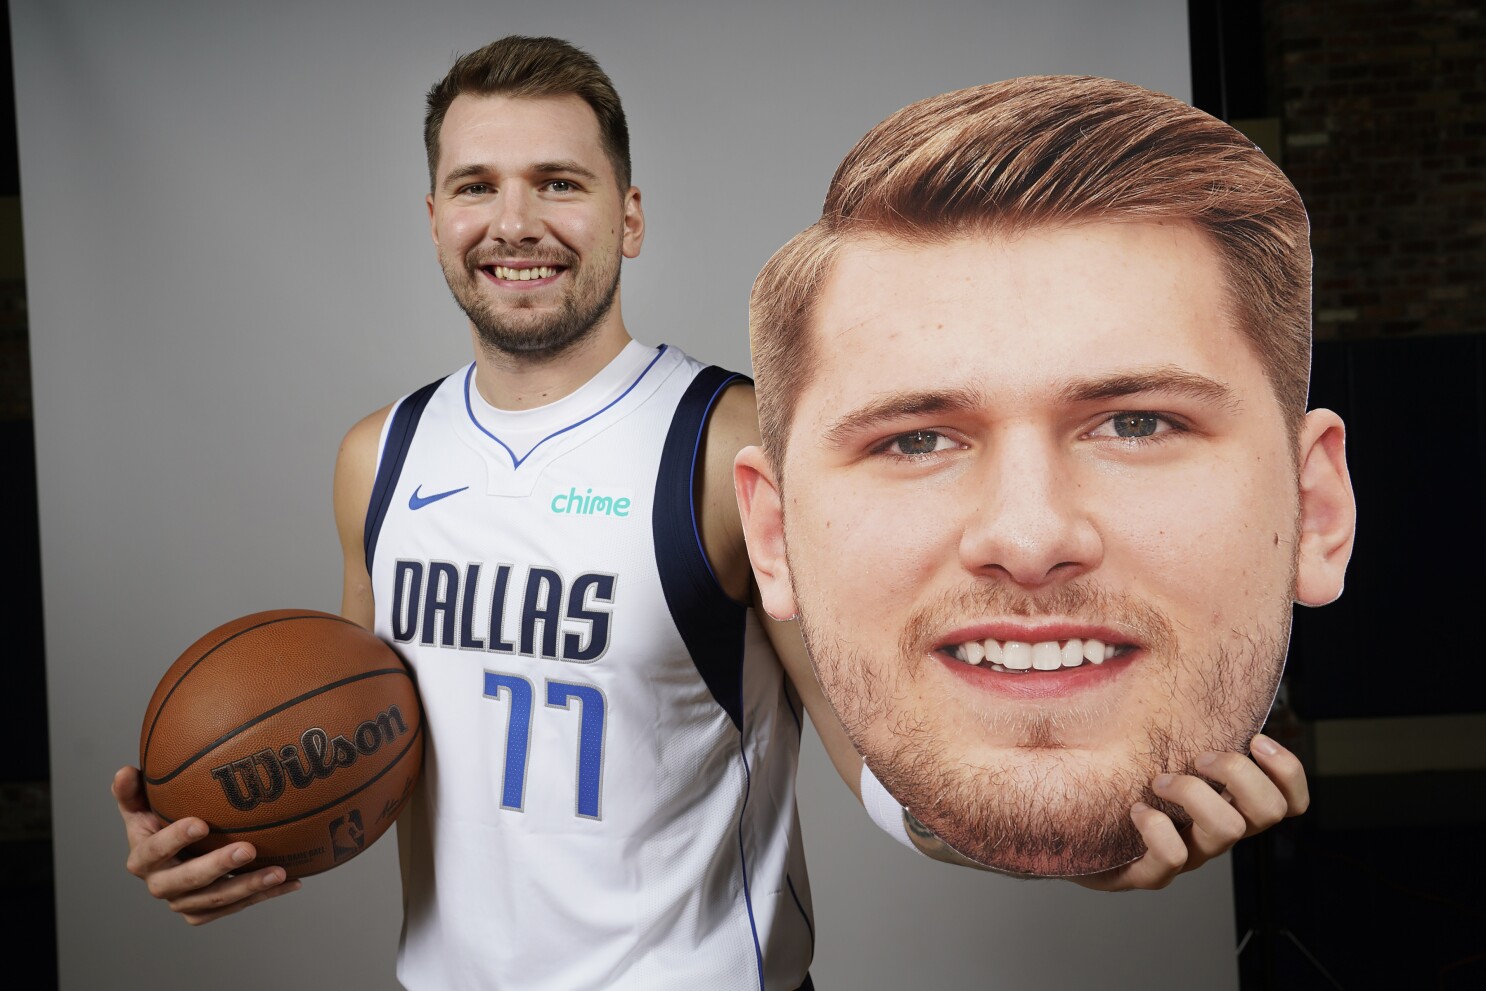 The Dallas Mavericks Are Different From Last Year. That Doesn't